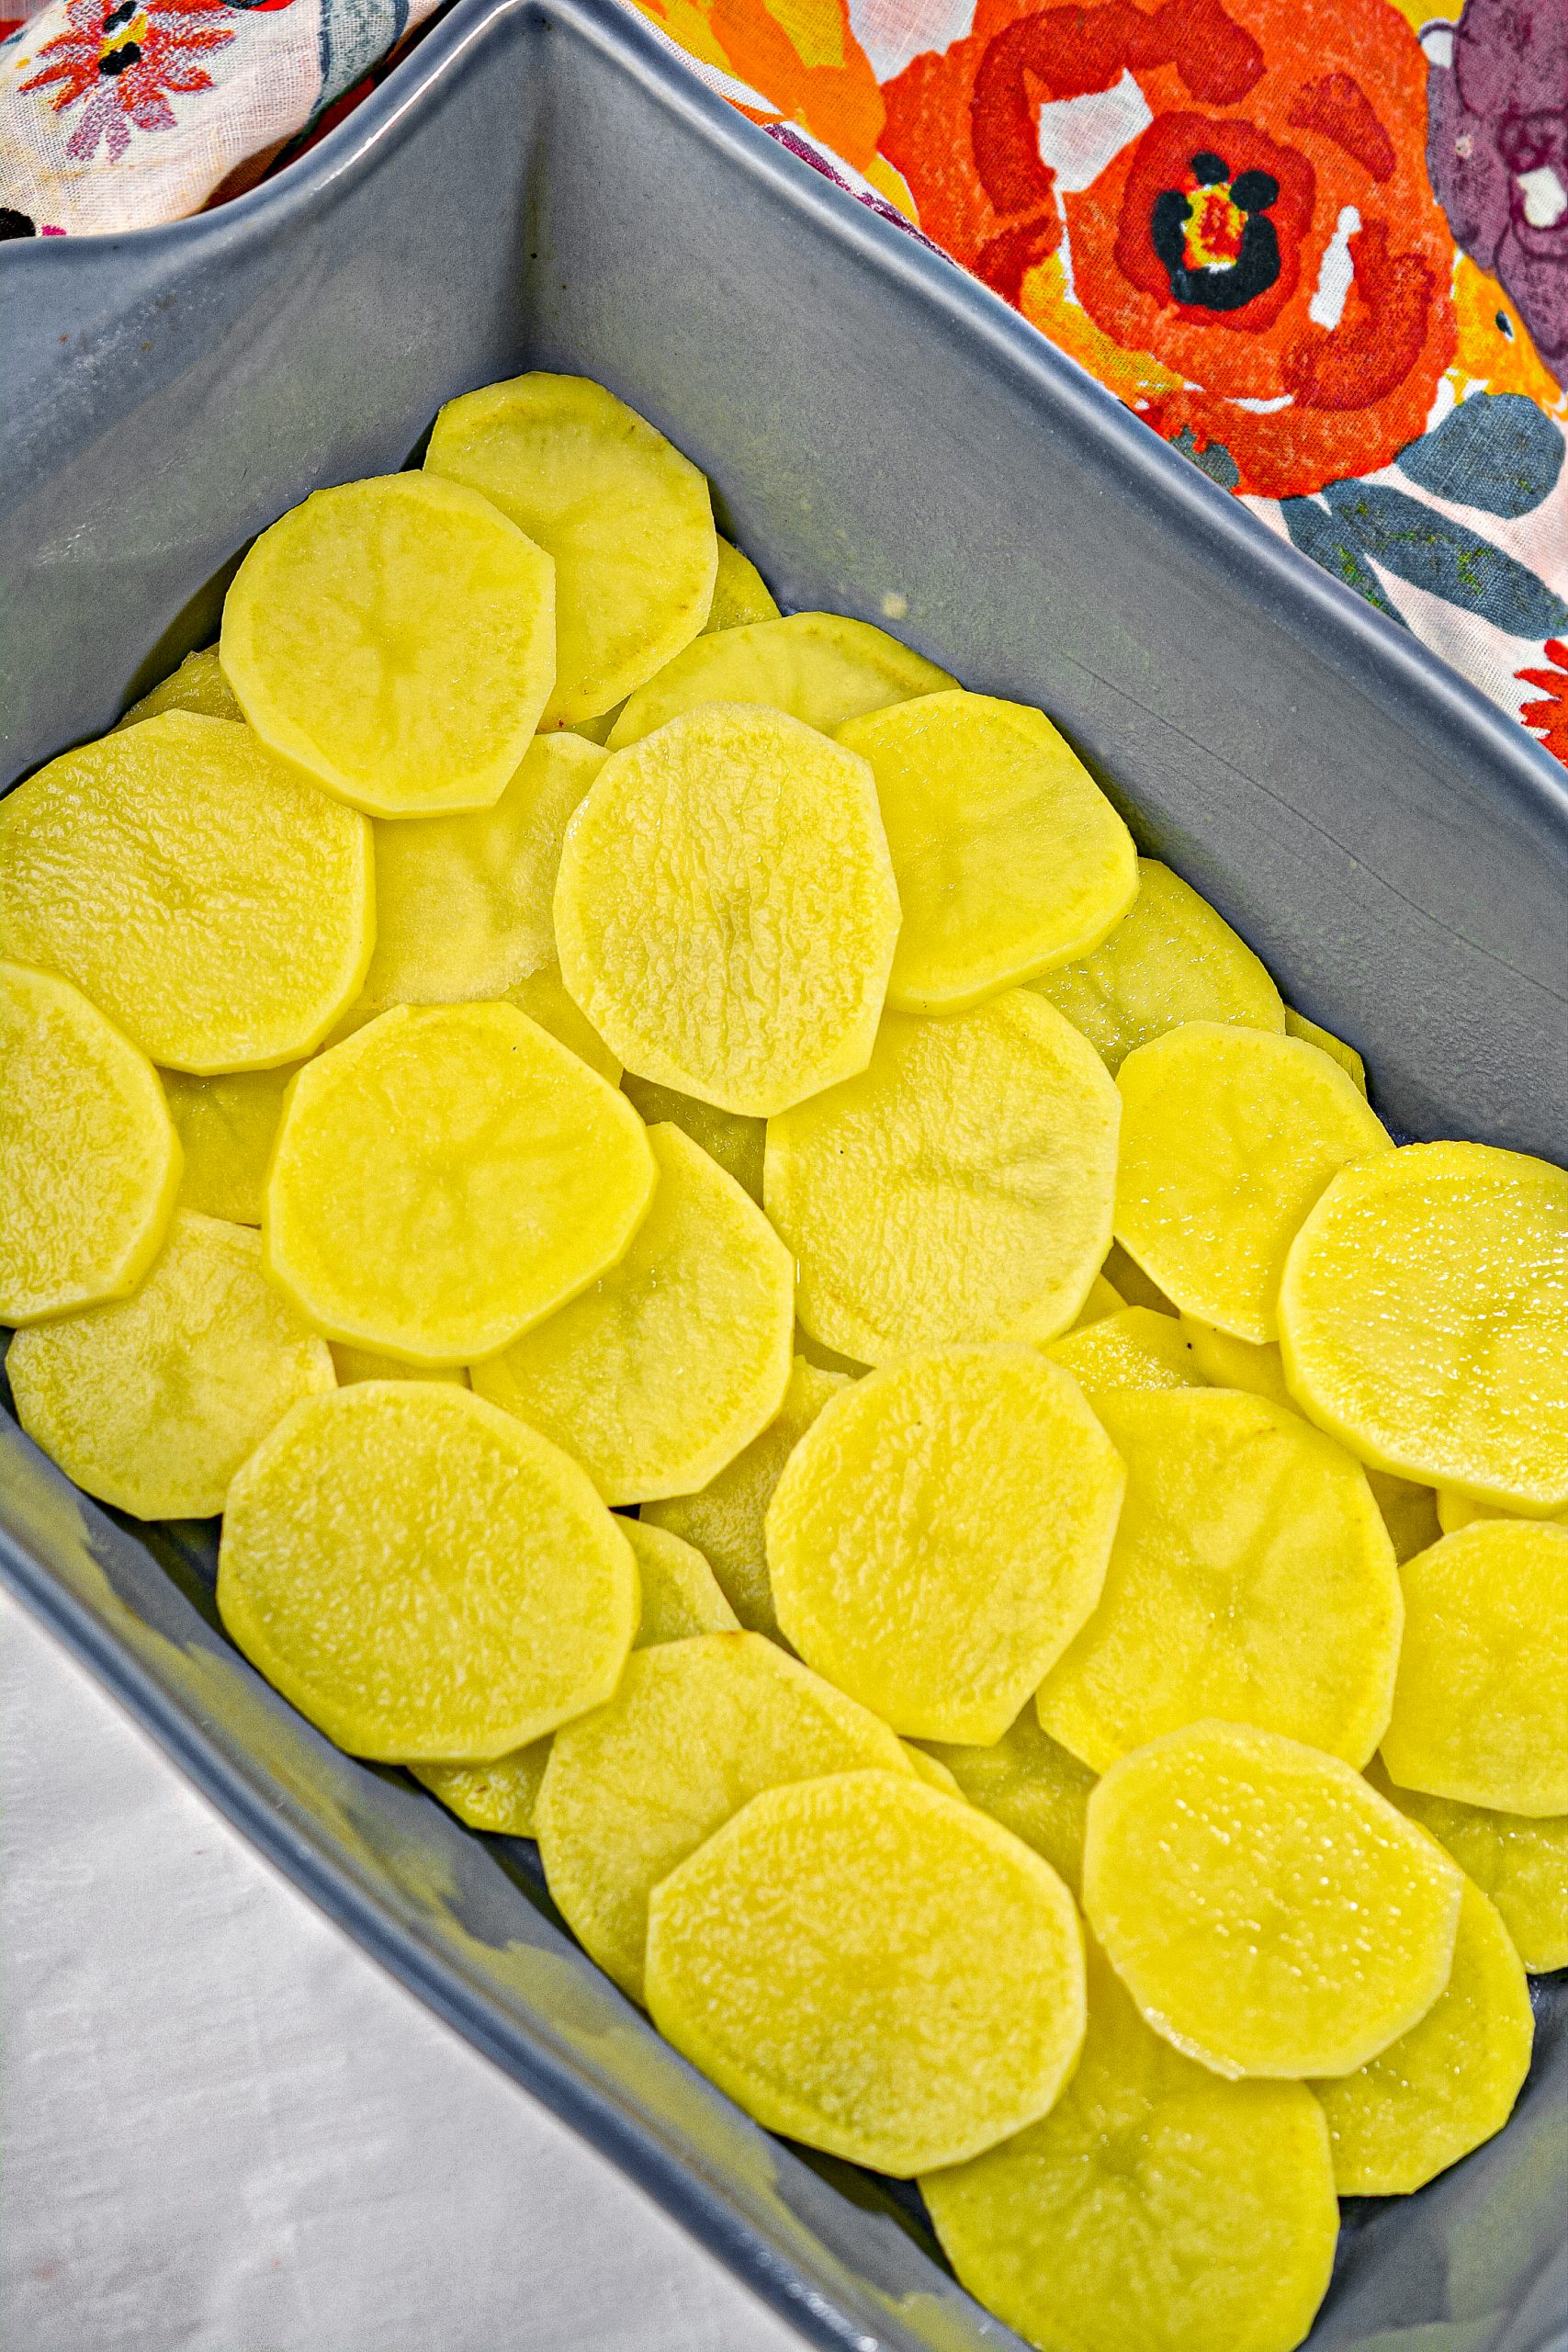 Layer the sliced potatoes on the bottom of a 9x13 baking dish.